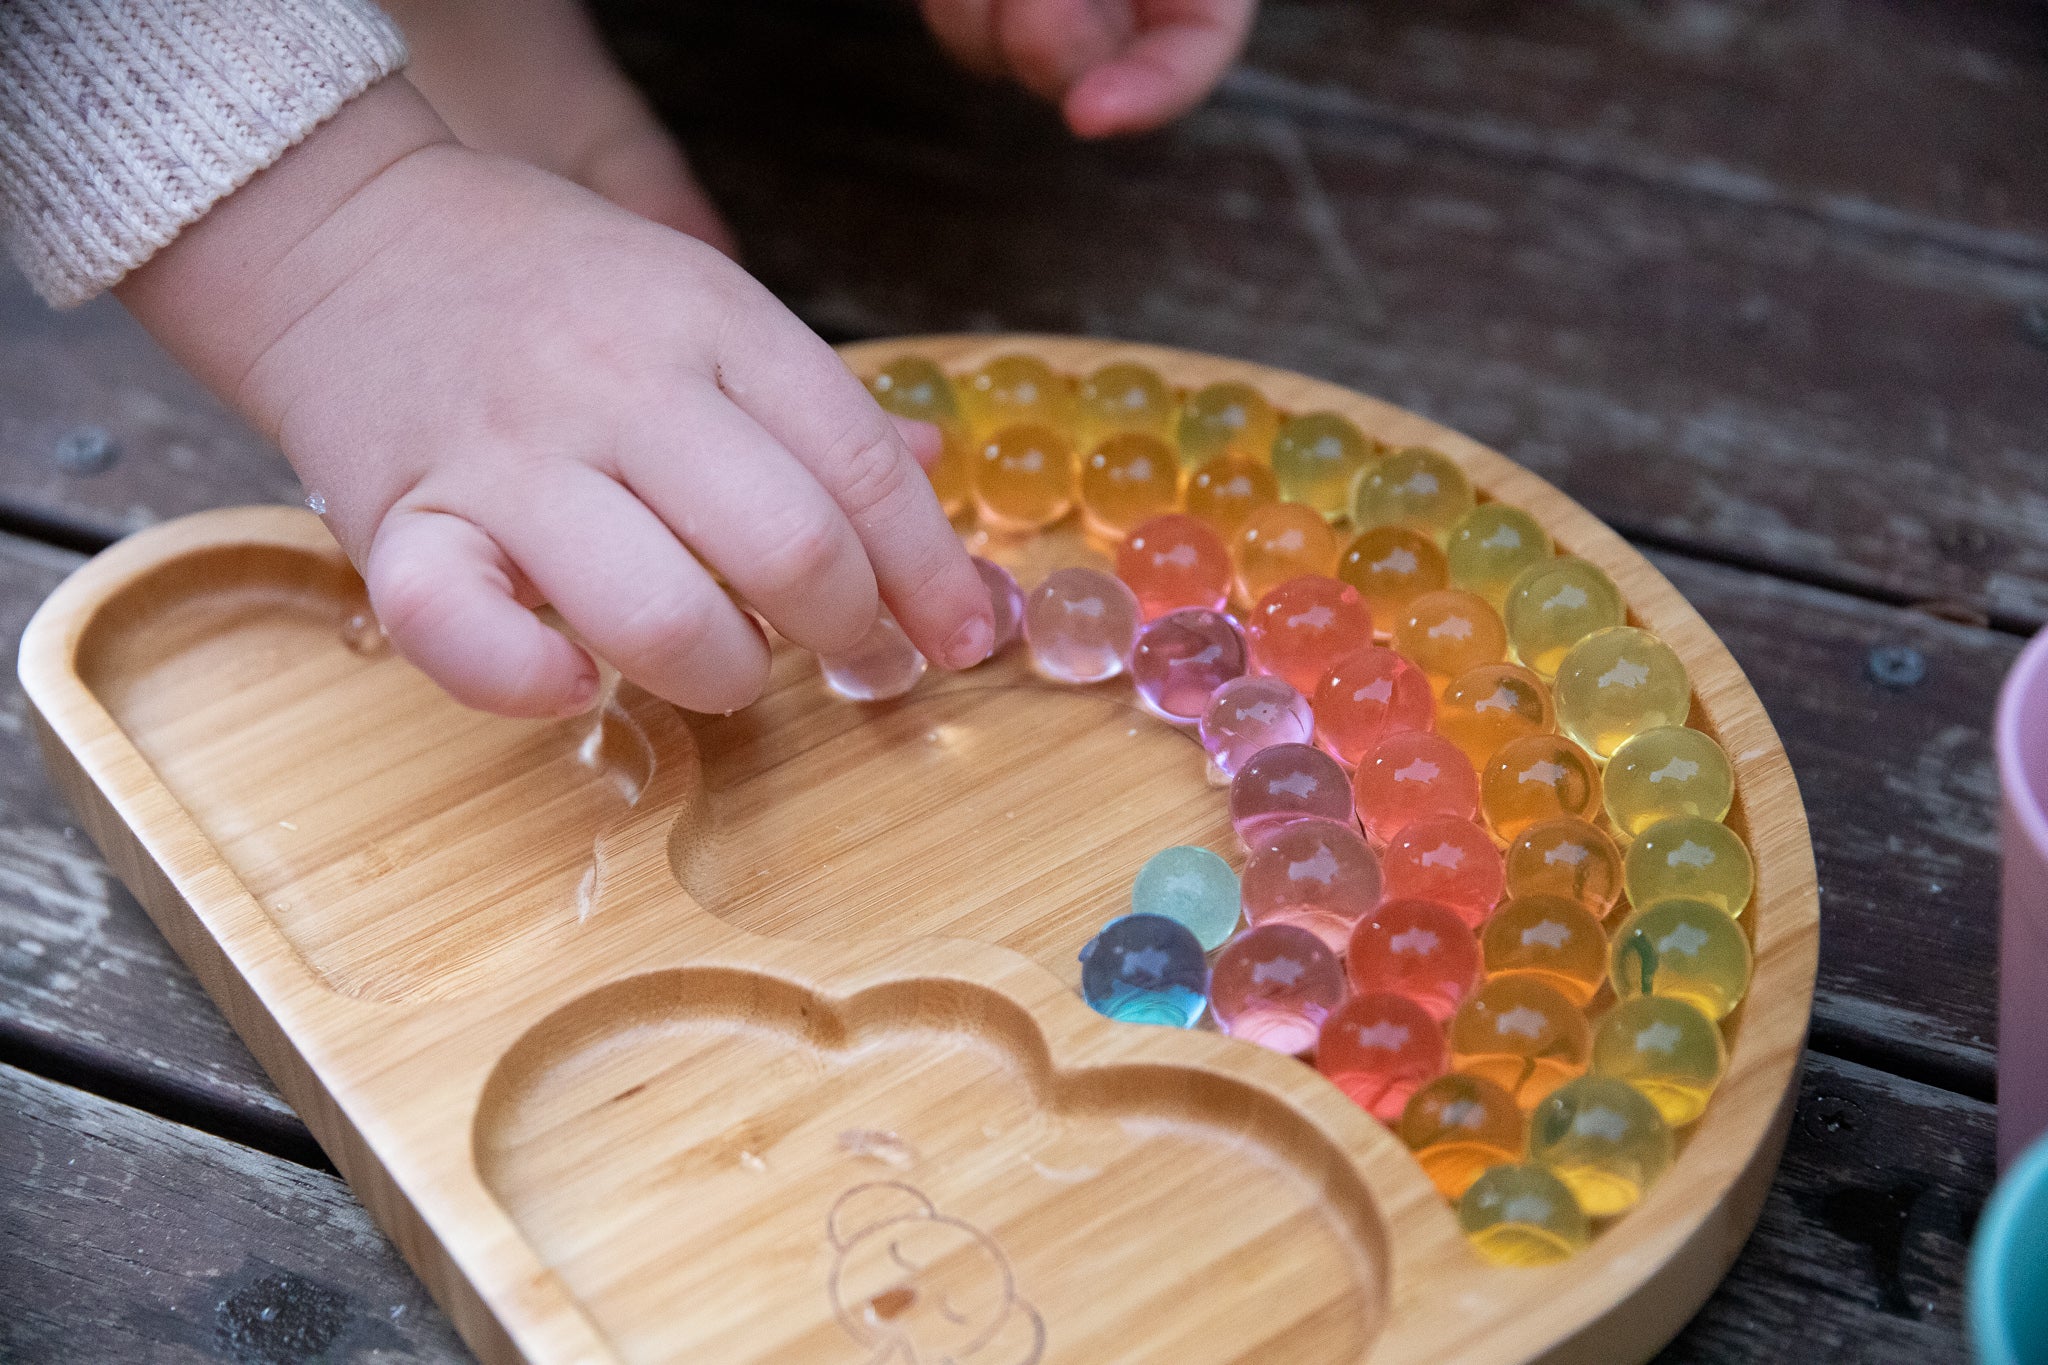 Huckleberry Sensory Water Marbles Unicorn Gems | Ages 4+ | Children of the Wild